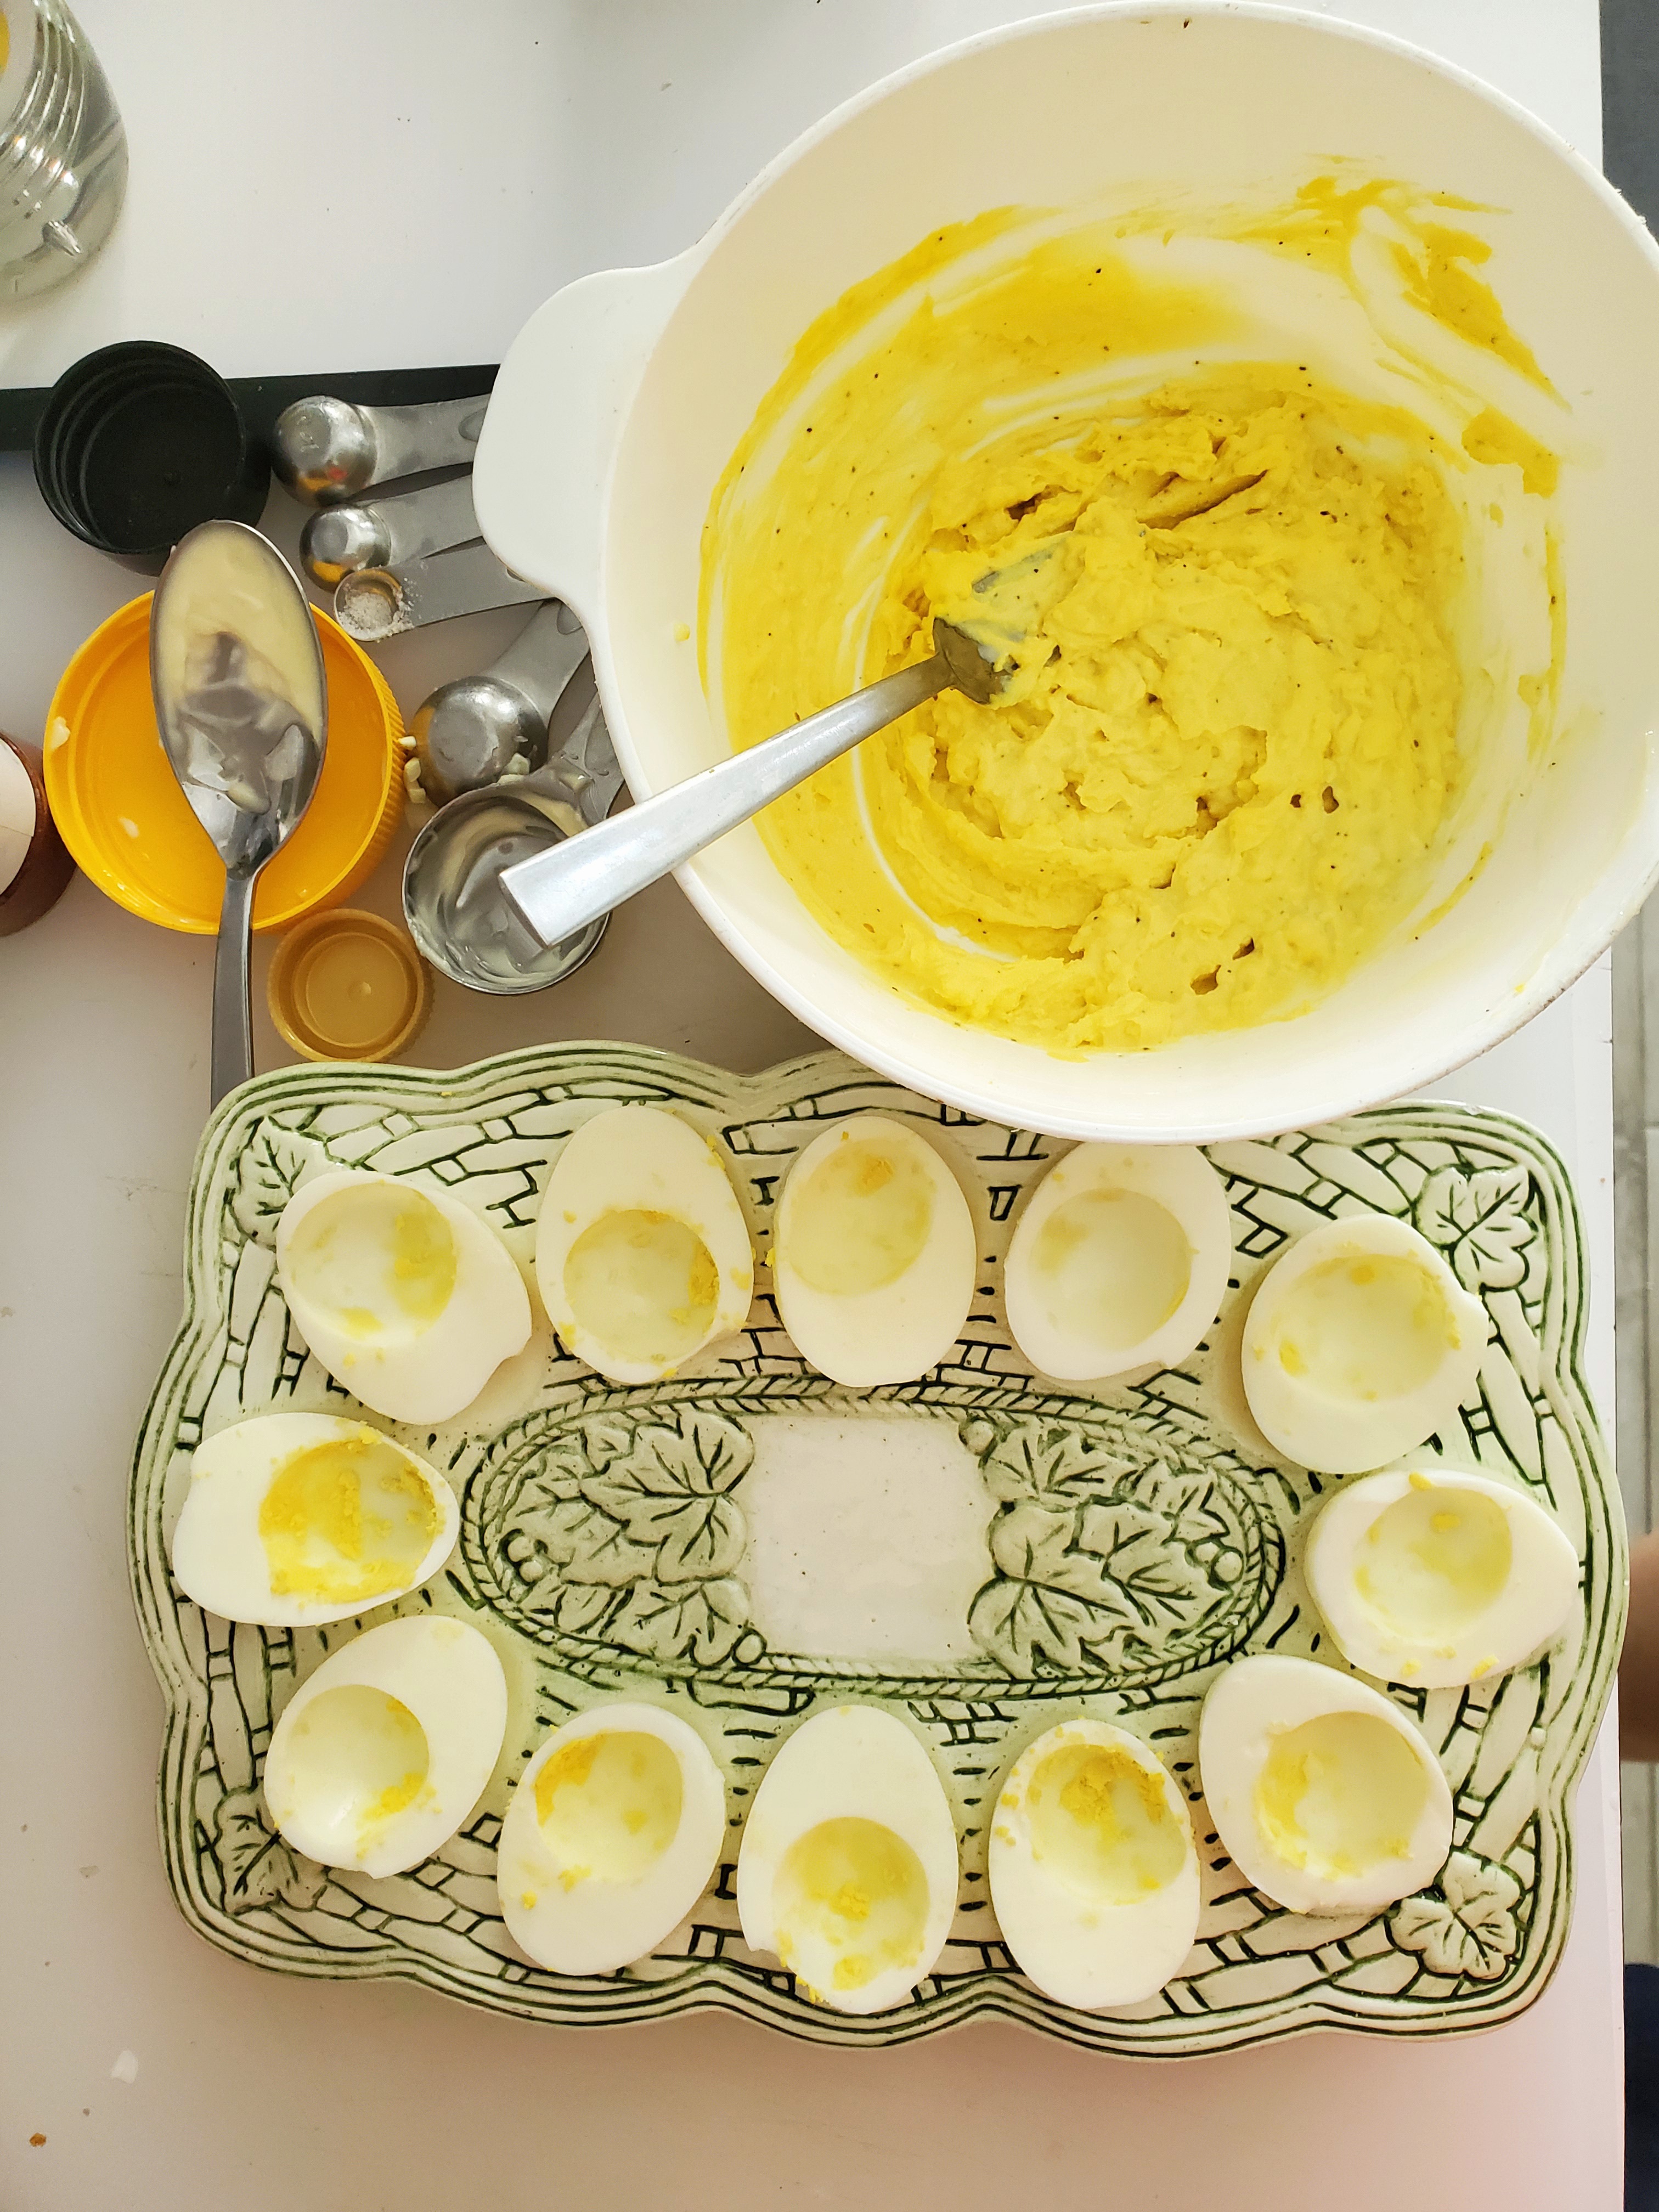 Ingredients for Classic Deviled Eggs